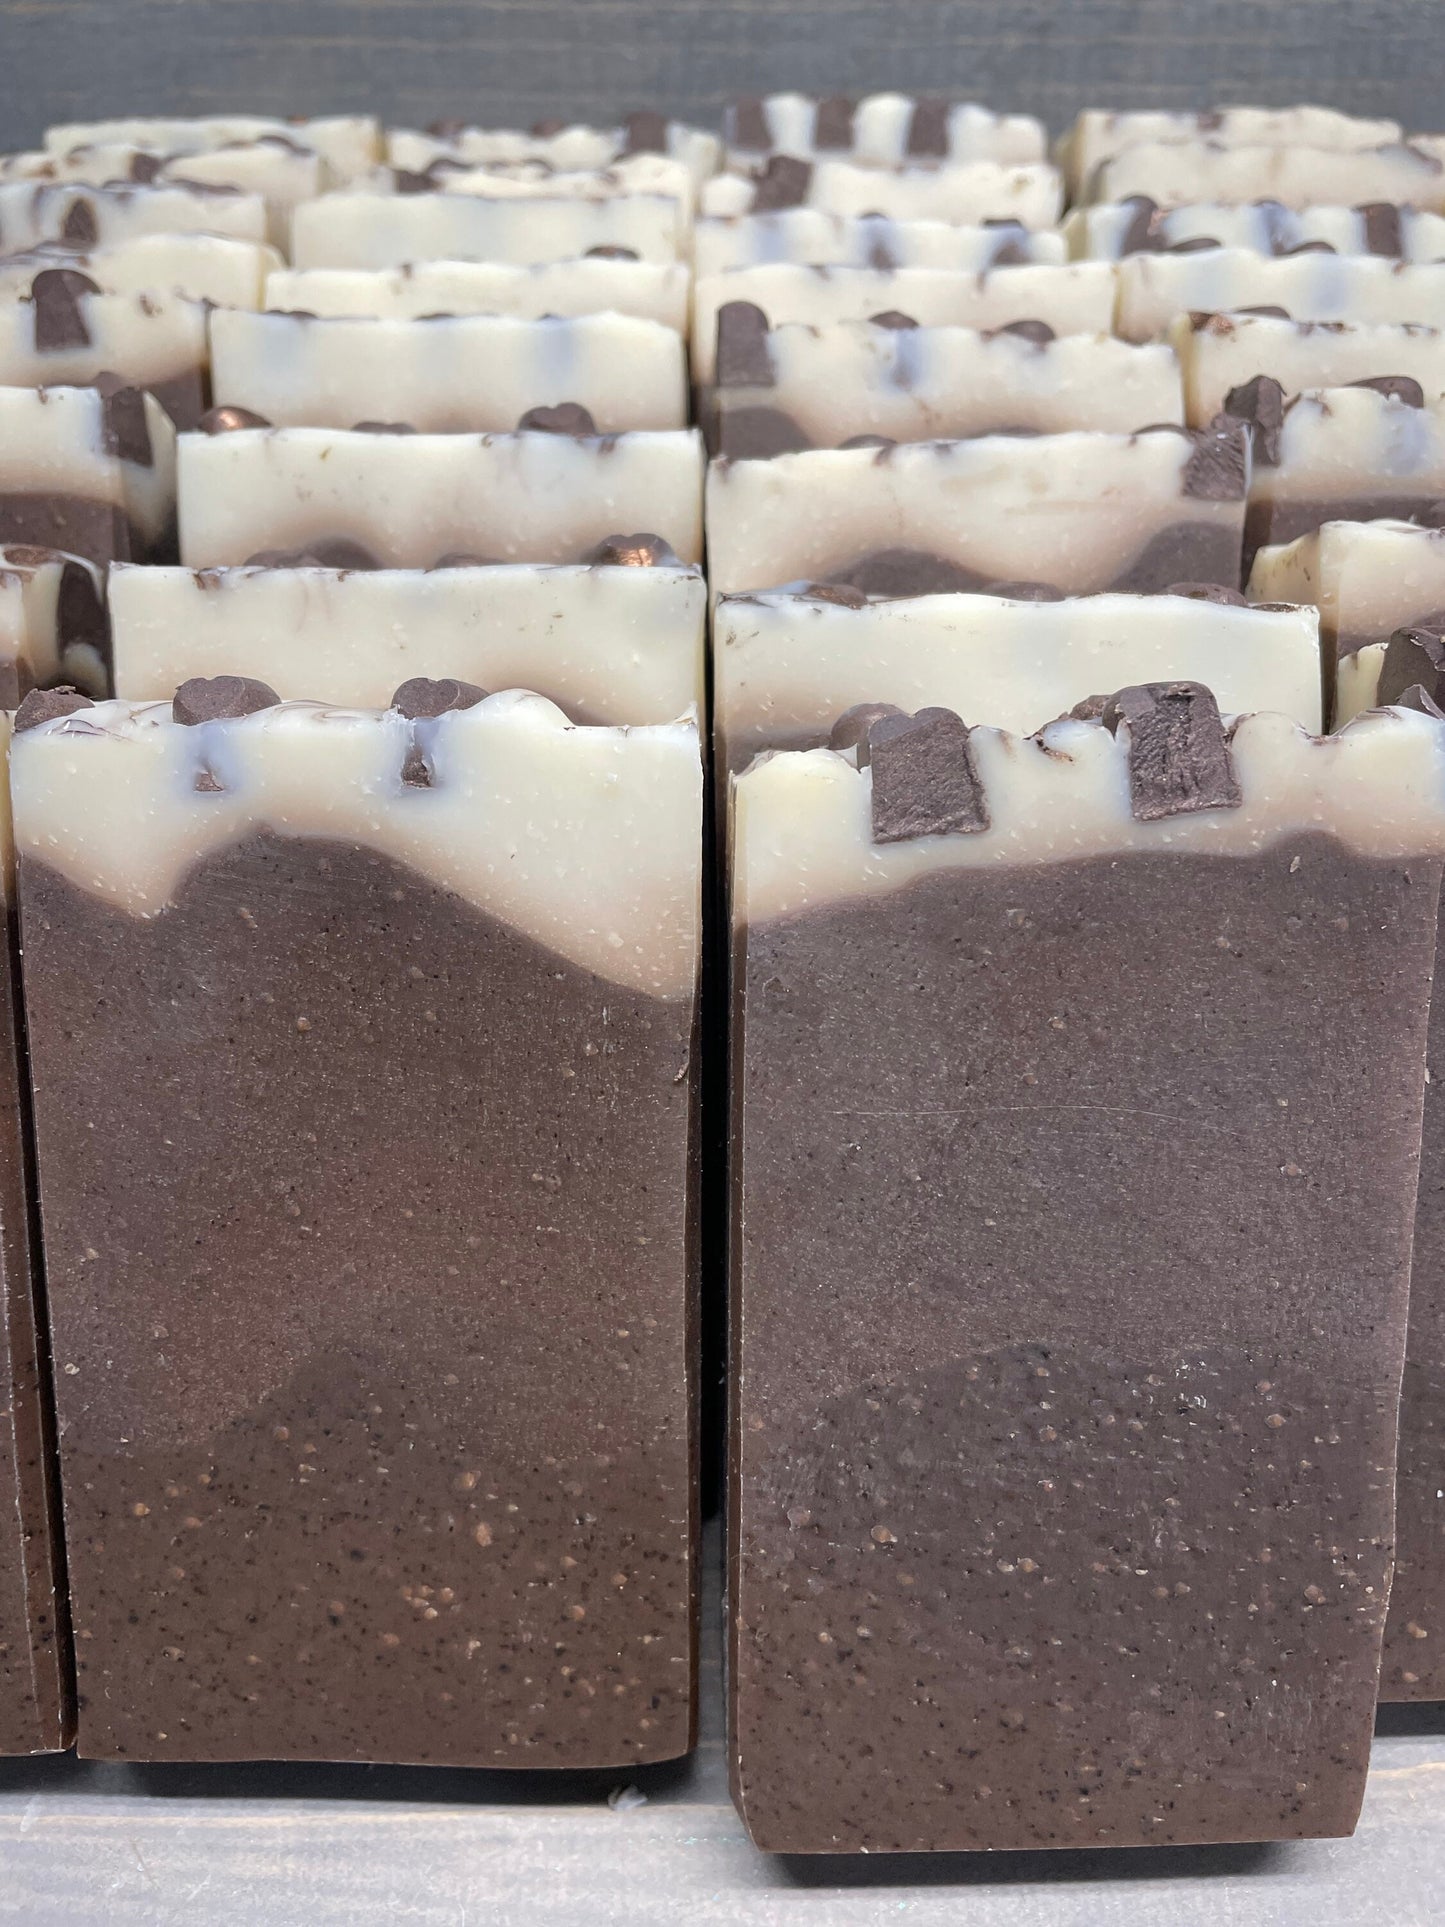 a photo of Breakfast Coffee soap, Oatmeal and Coffee Soap with a brown base, topped in a cream color and has coffee soap adornments